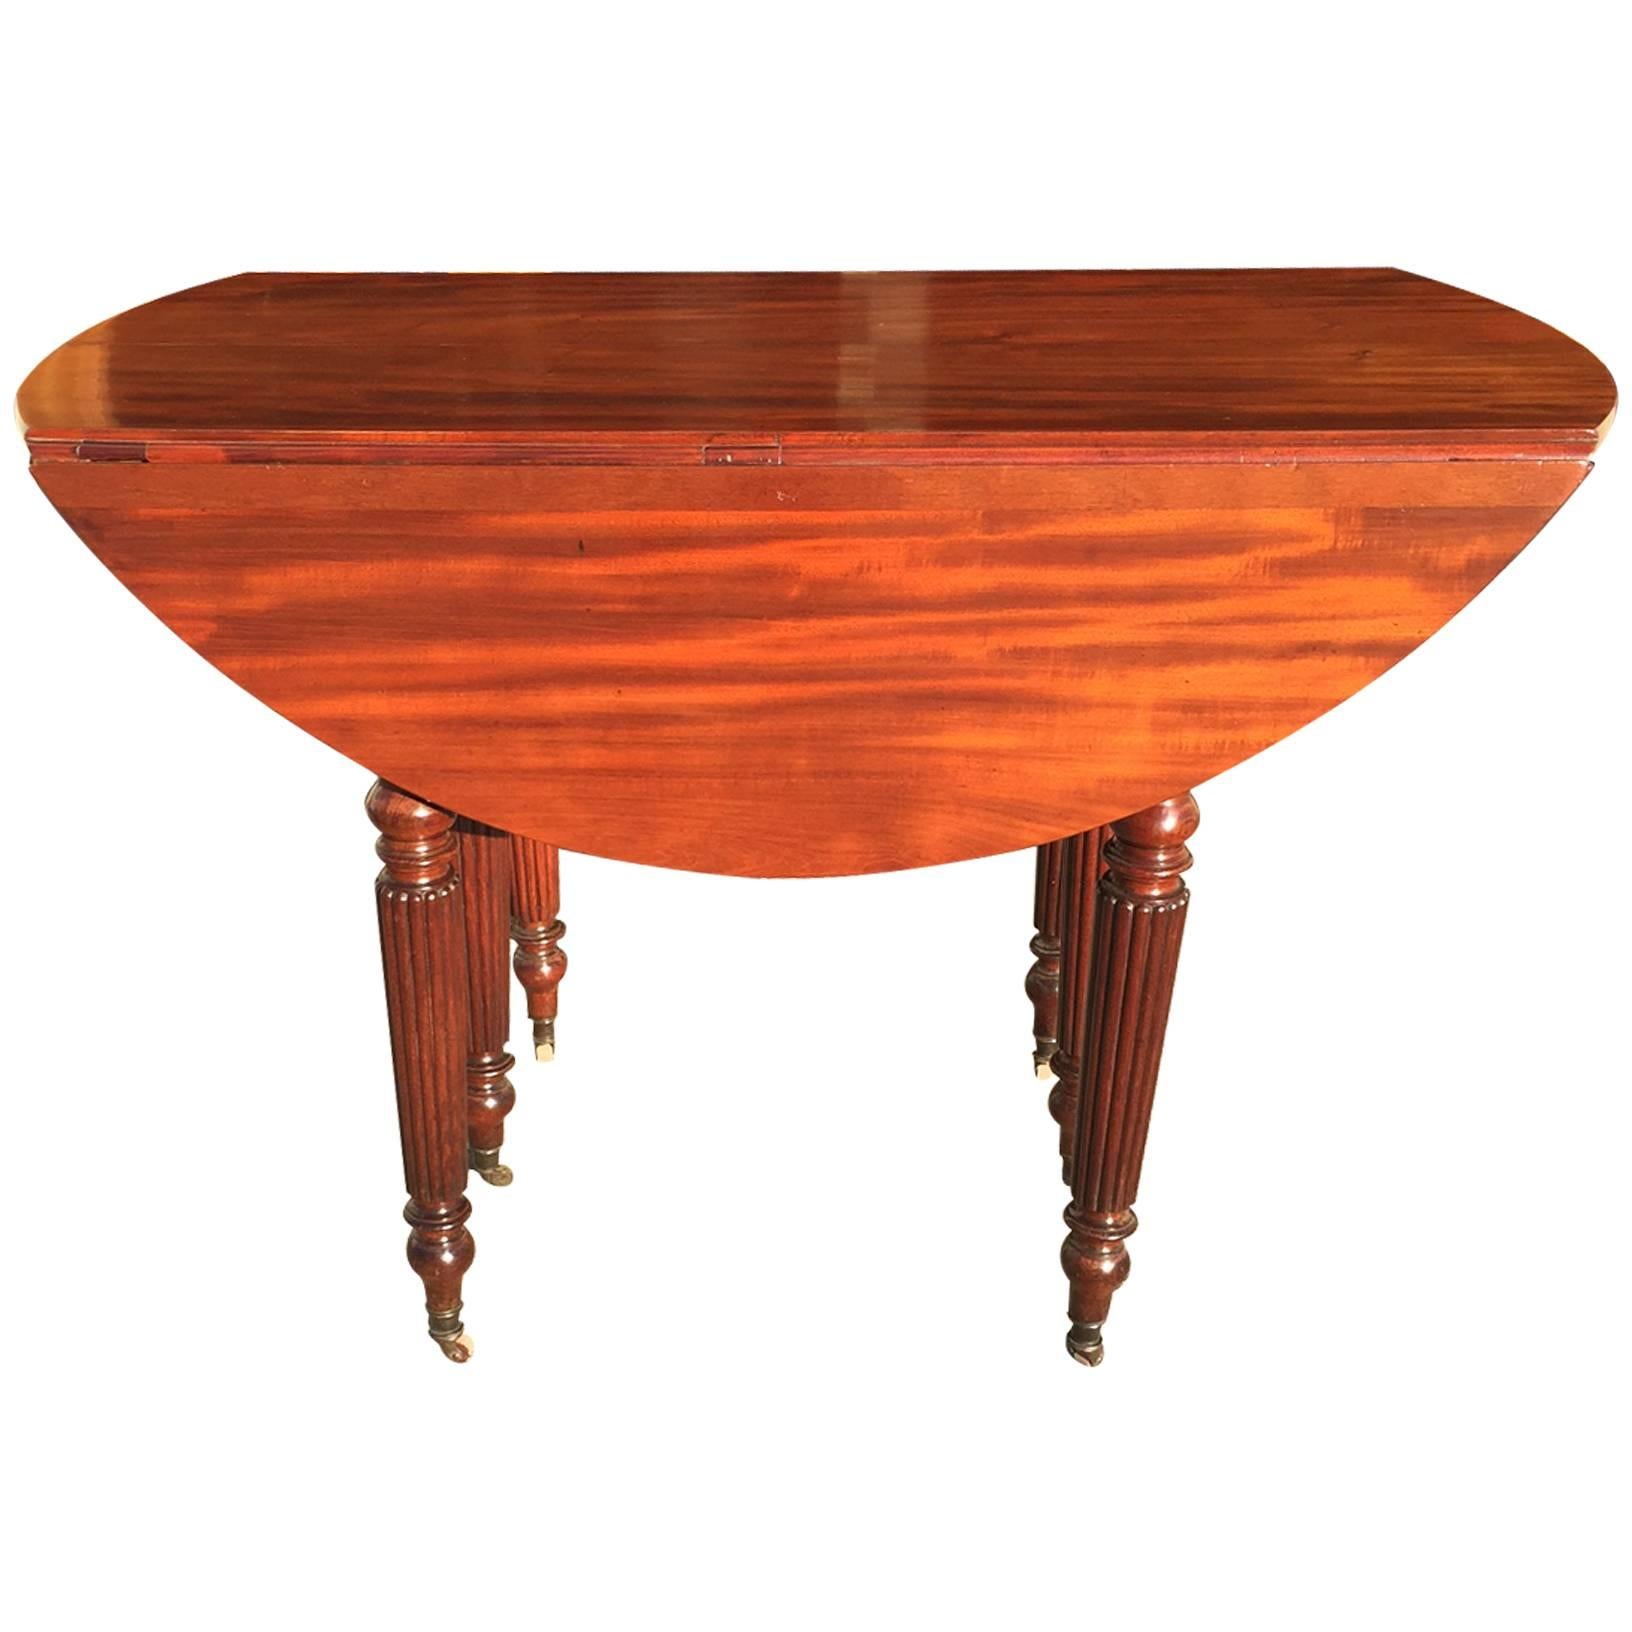 Mid-19th Century French Mahogany Drop Leaf Extending Dining Table